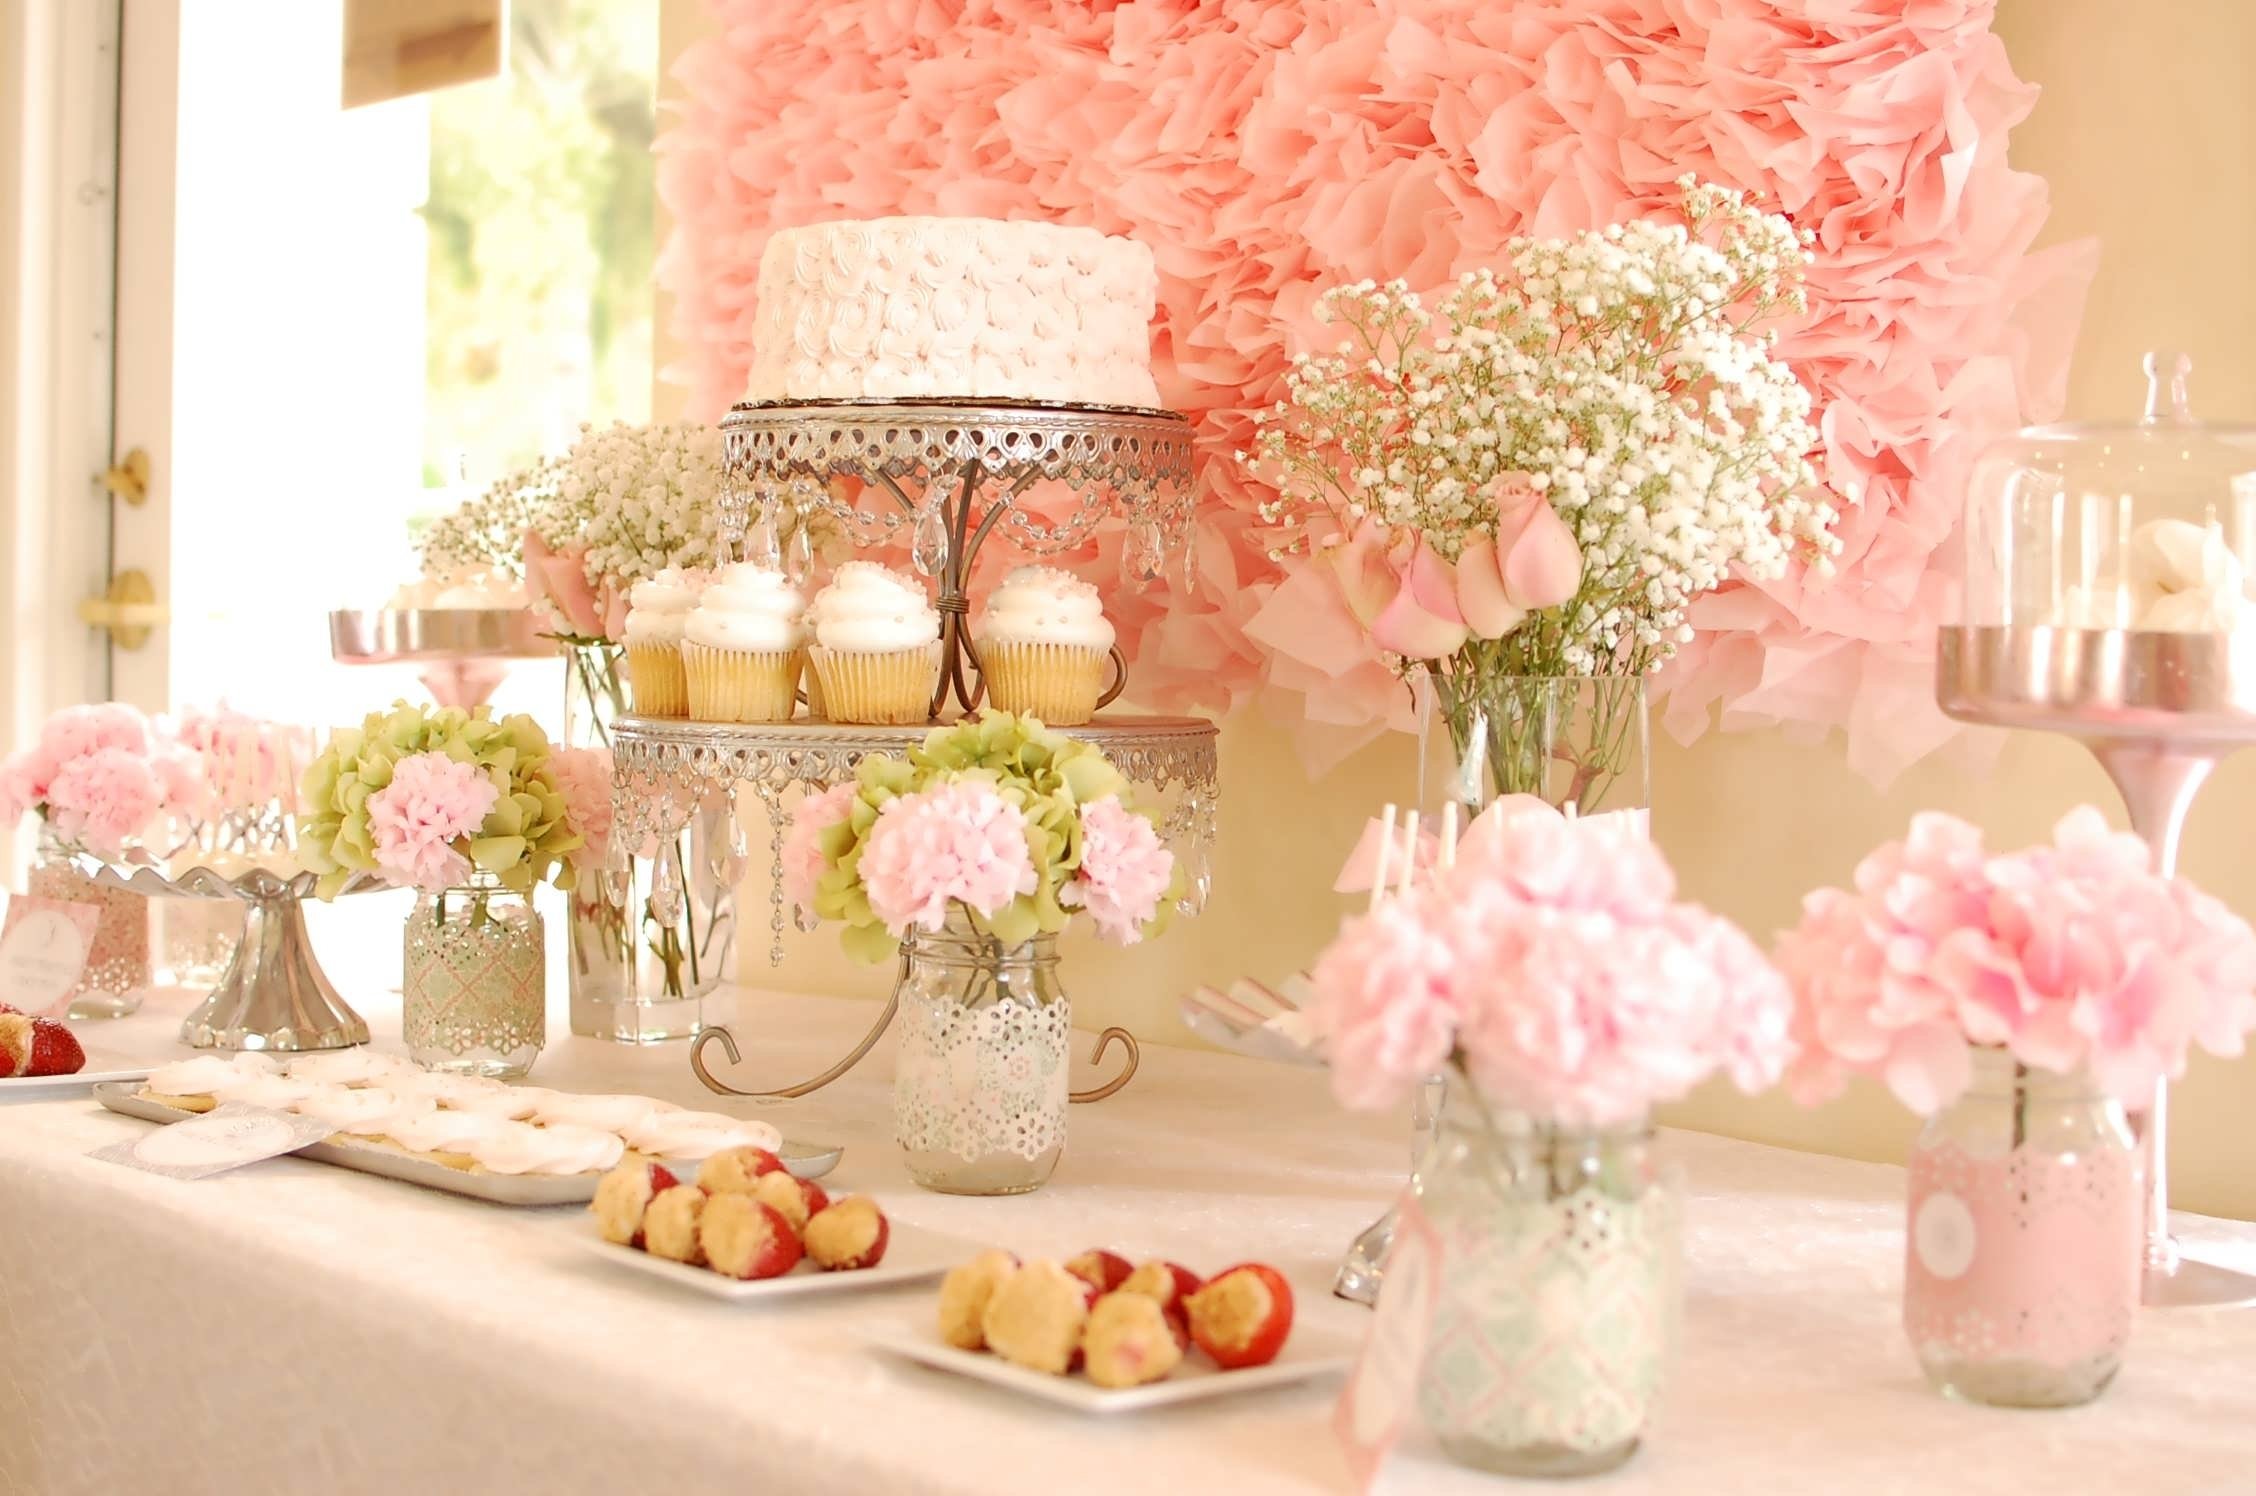 10 Attractive Bridal Shower Table Decoration Ideas decorating ideas for bridal shower elegant wedding shower table 2022